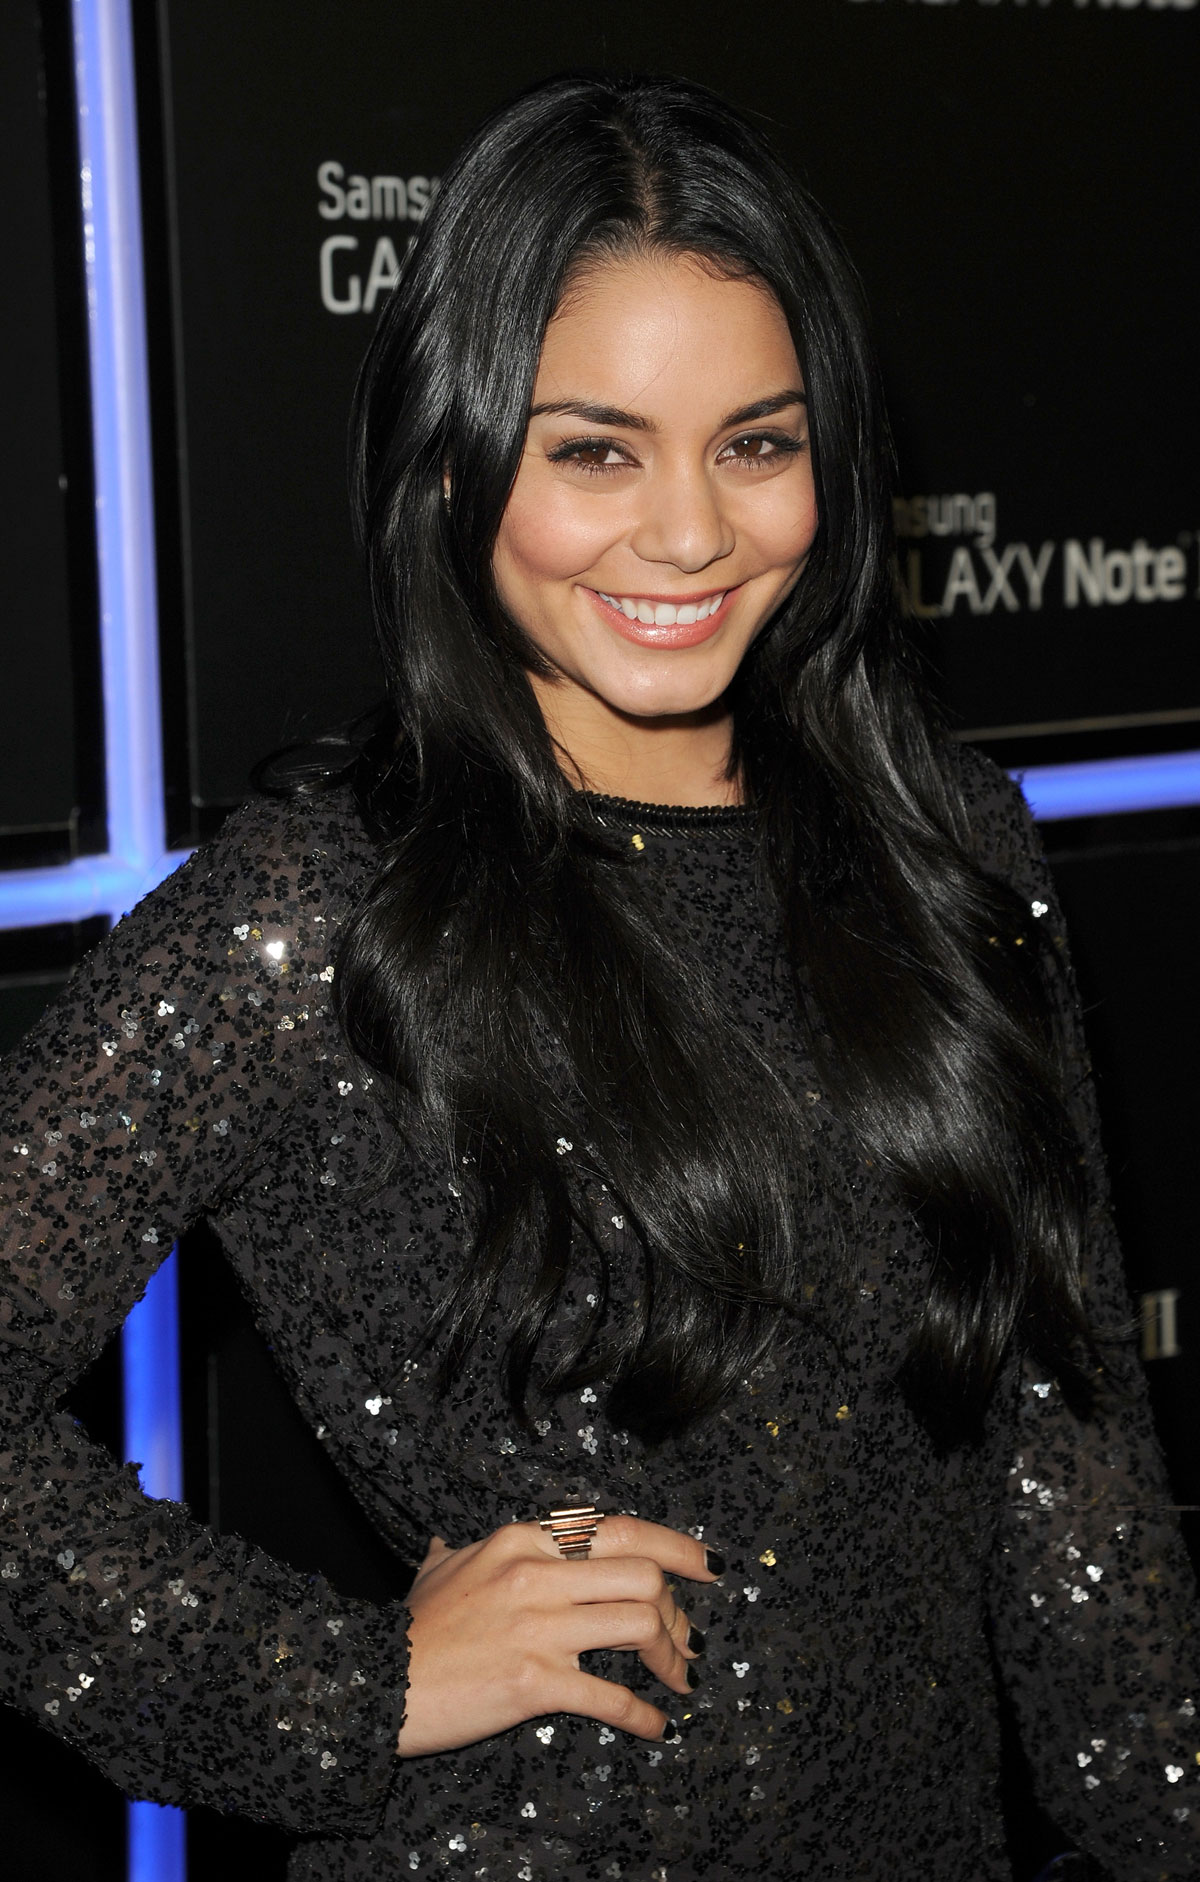 VANESSA HUDGENS at Samsung Galaxy Note II Launch in Beverly Hills - HawtCelebs